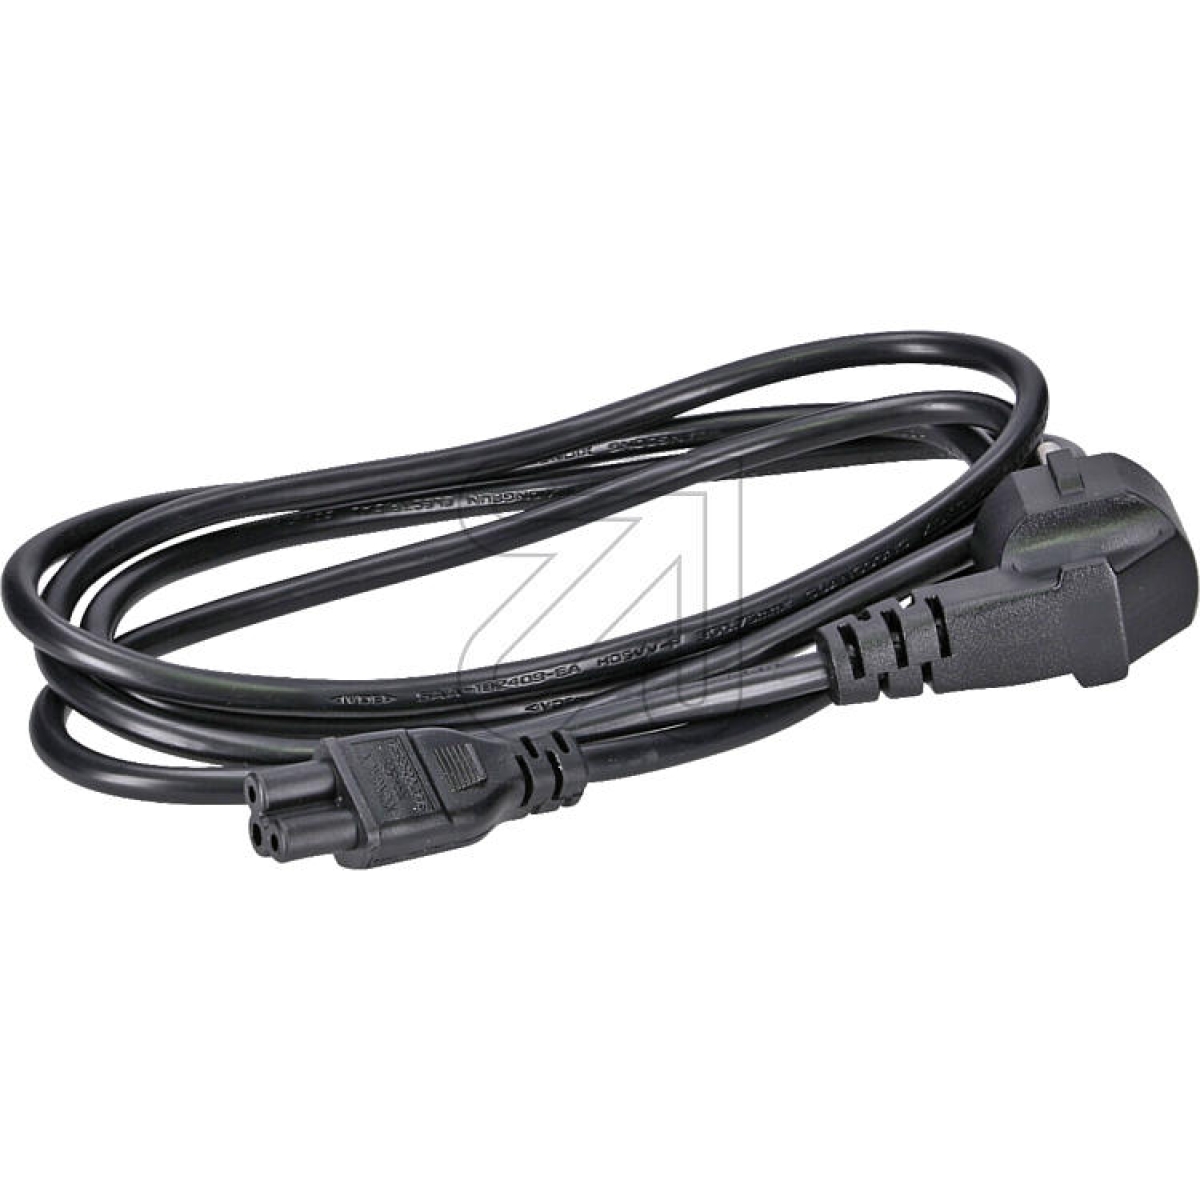 EGB device supply line black 2mArticle-No: 034120